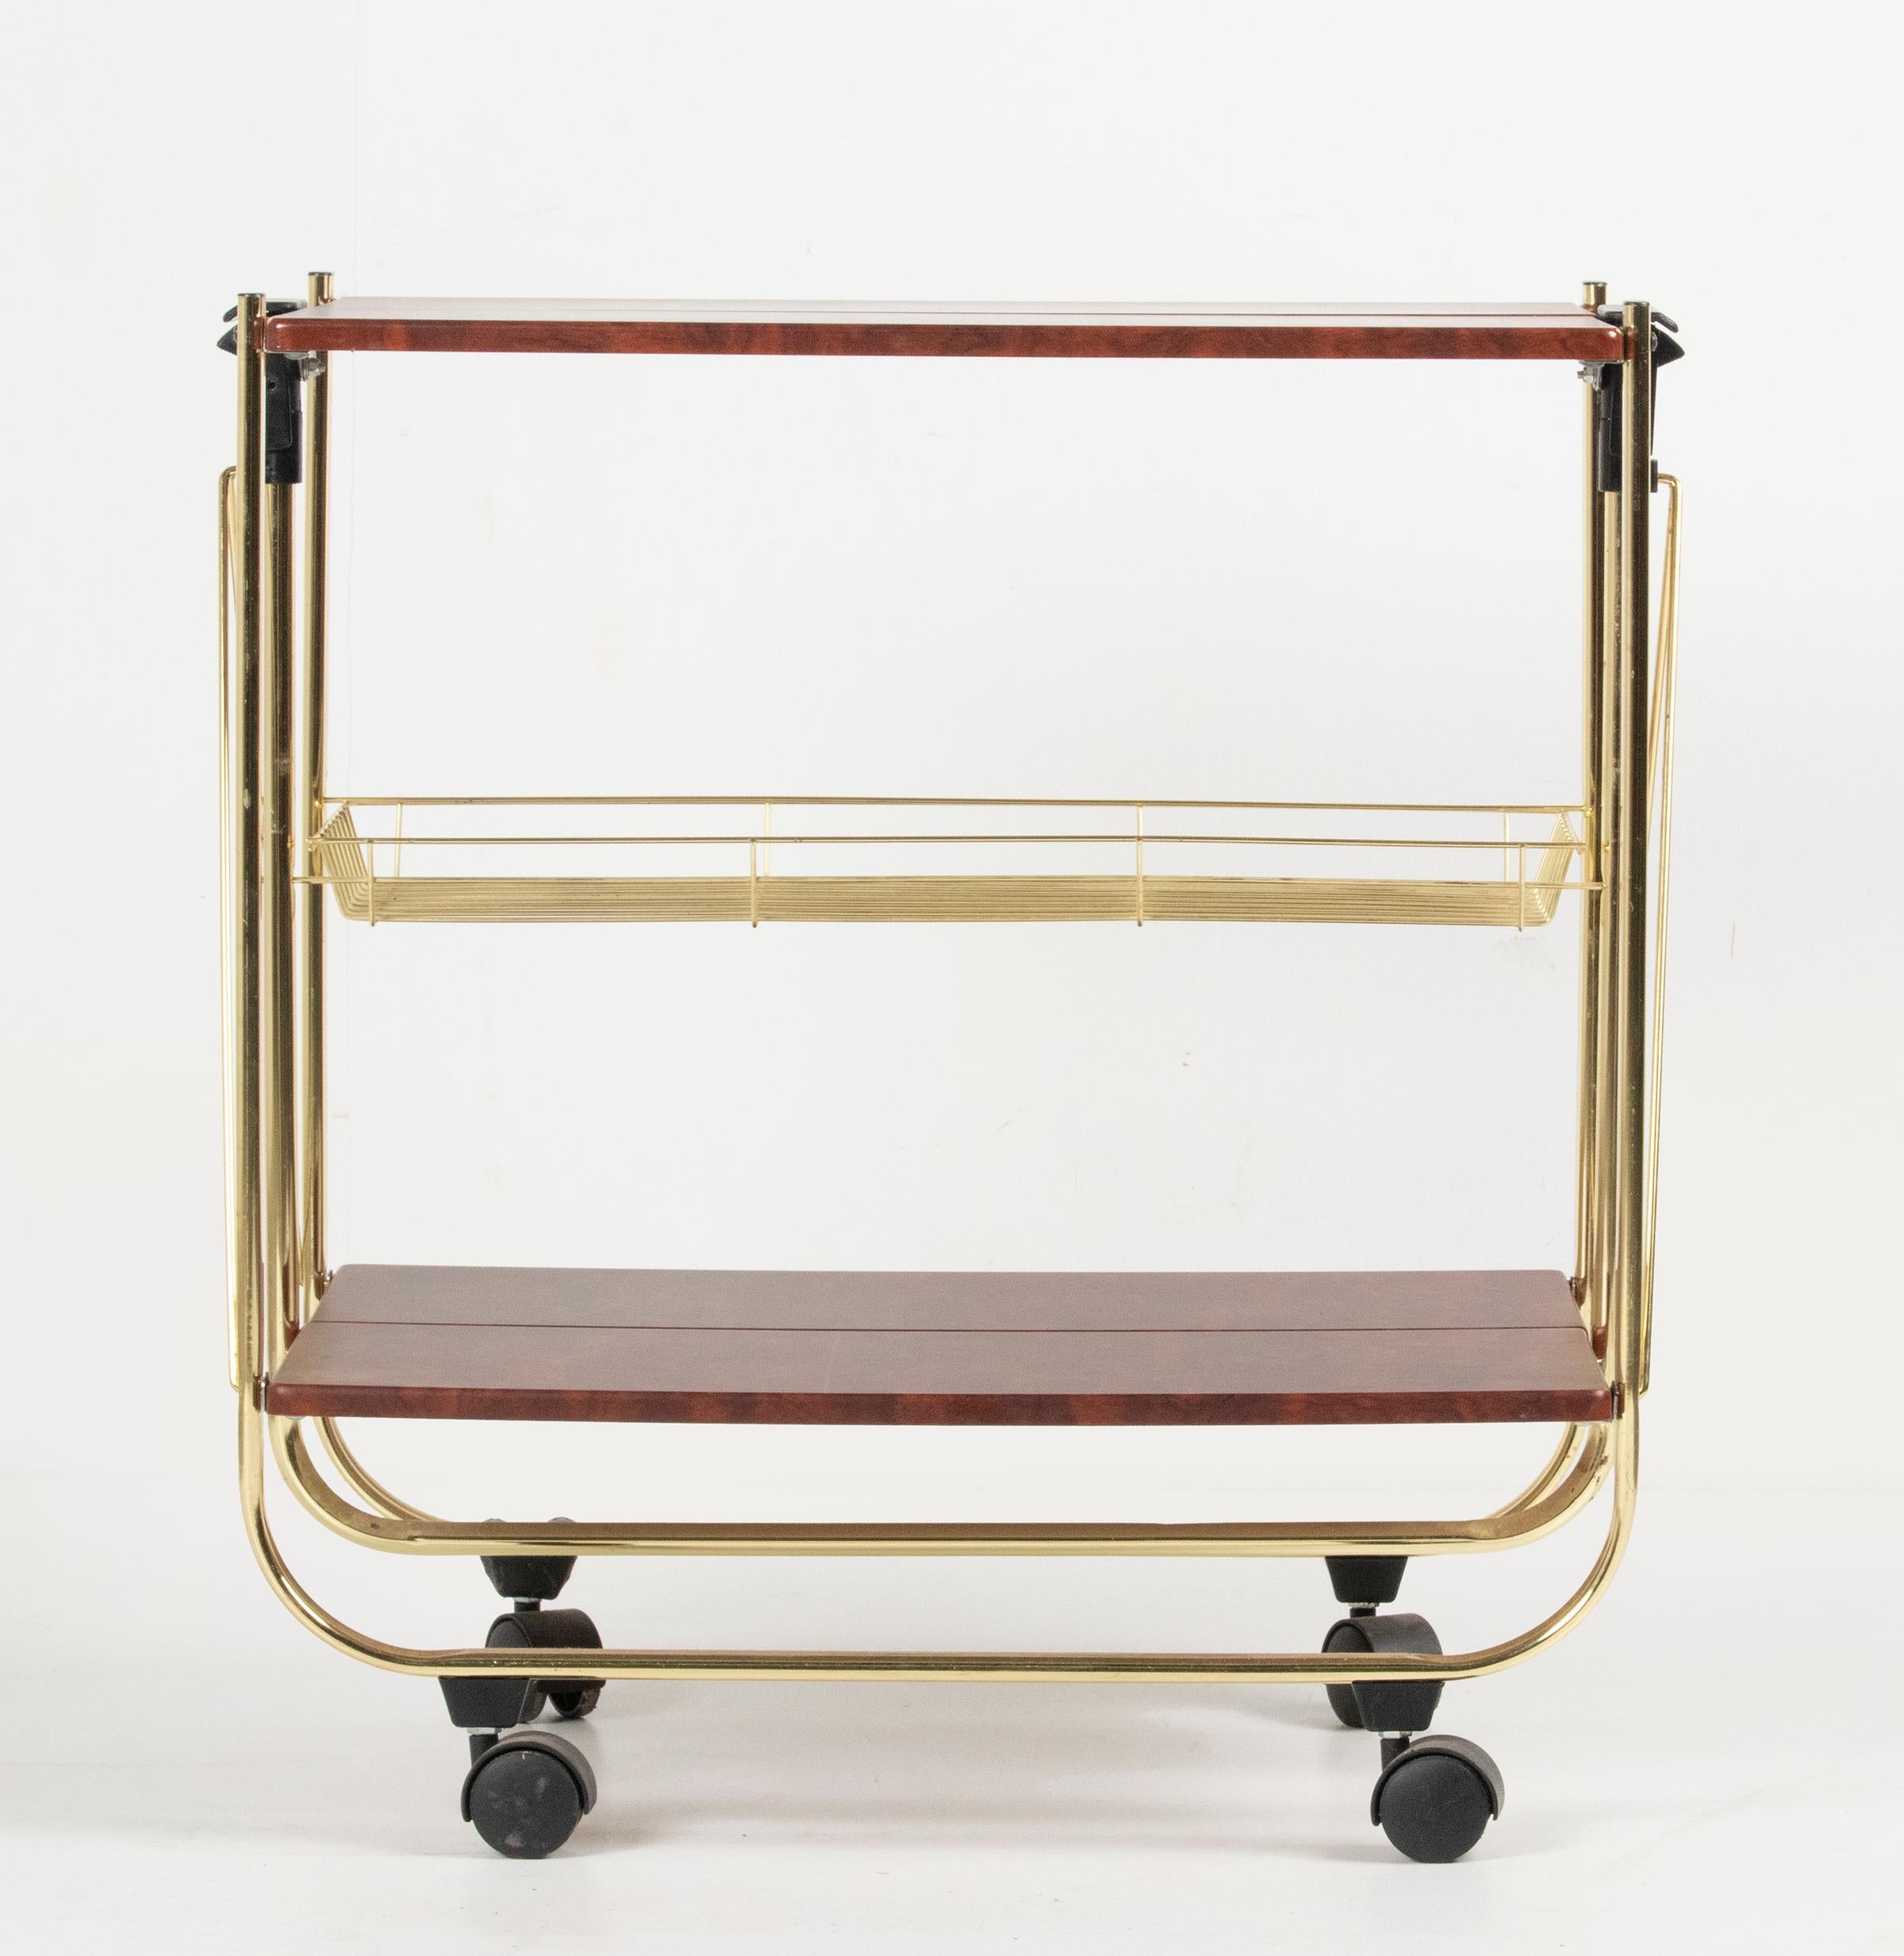 A vintage multifunctional French formica and polished brass folding serving cart. Made in France, 1970-1975. The trays are made of formica in imitation burl mahogany. In the middle an extra storage rack. In good condition.
Dimensions: 70 x 69 x 40